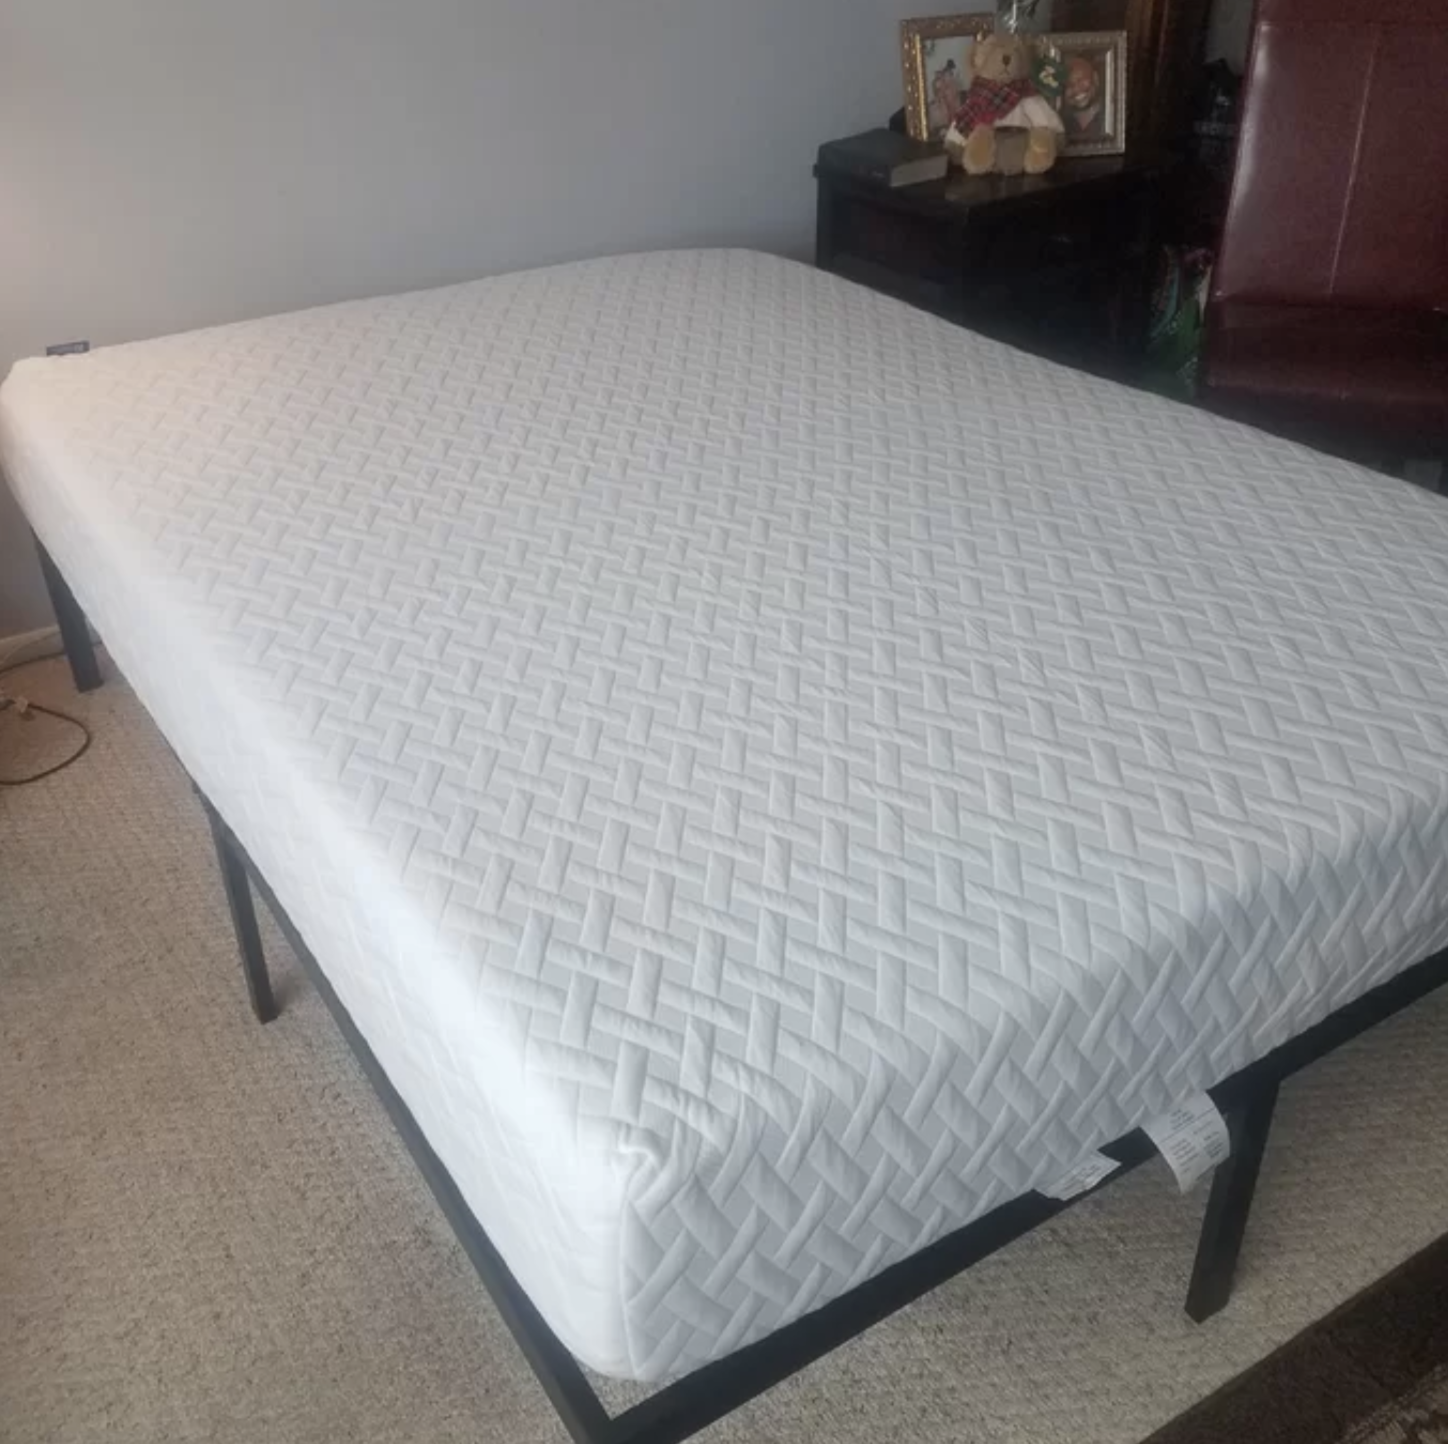 Reviewer photo of mattress covered in a mattress topper on a bed frame